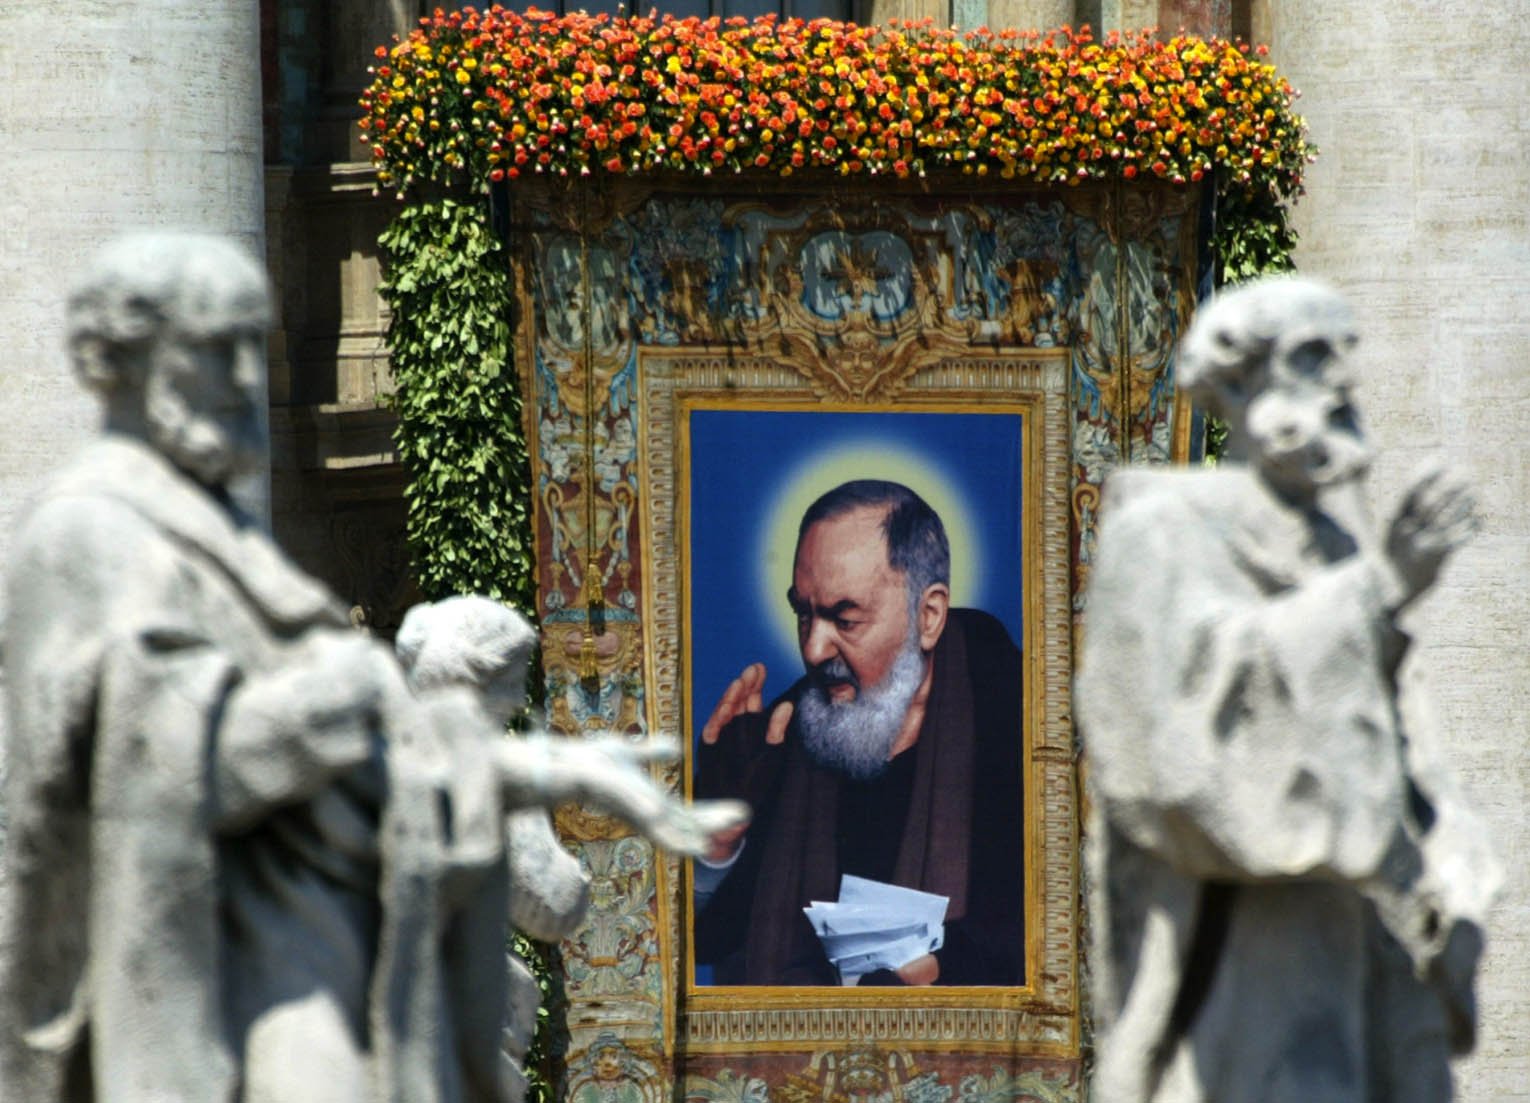 On Padre Pio’s feast day, lessons on facing suffering and rejection